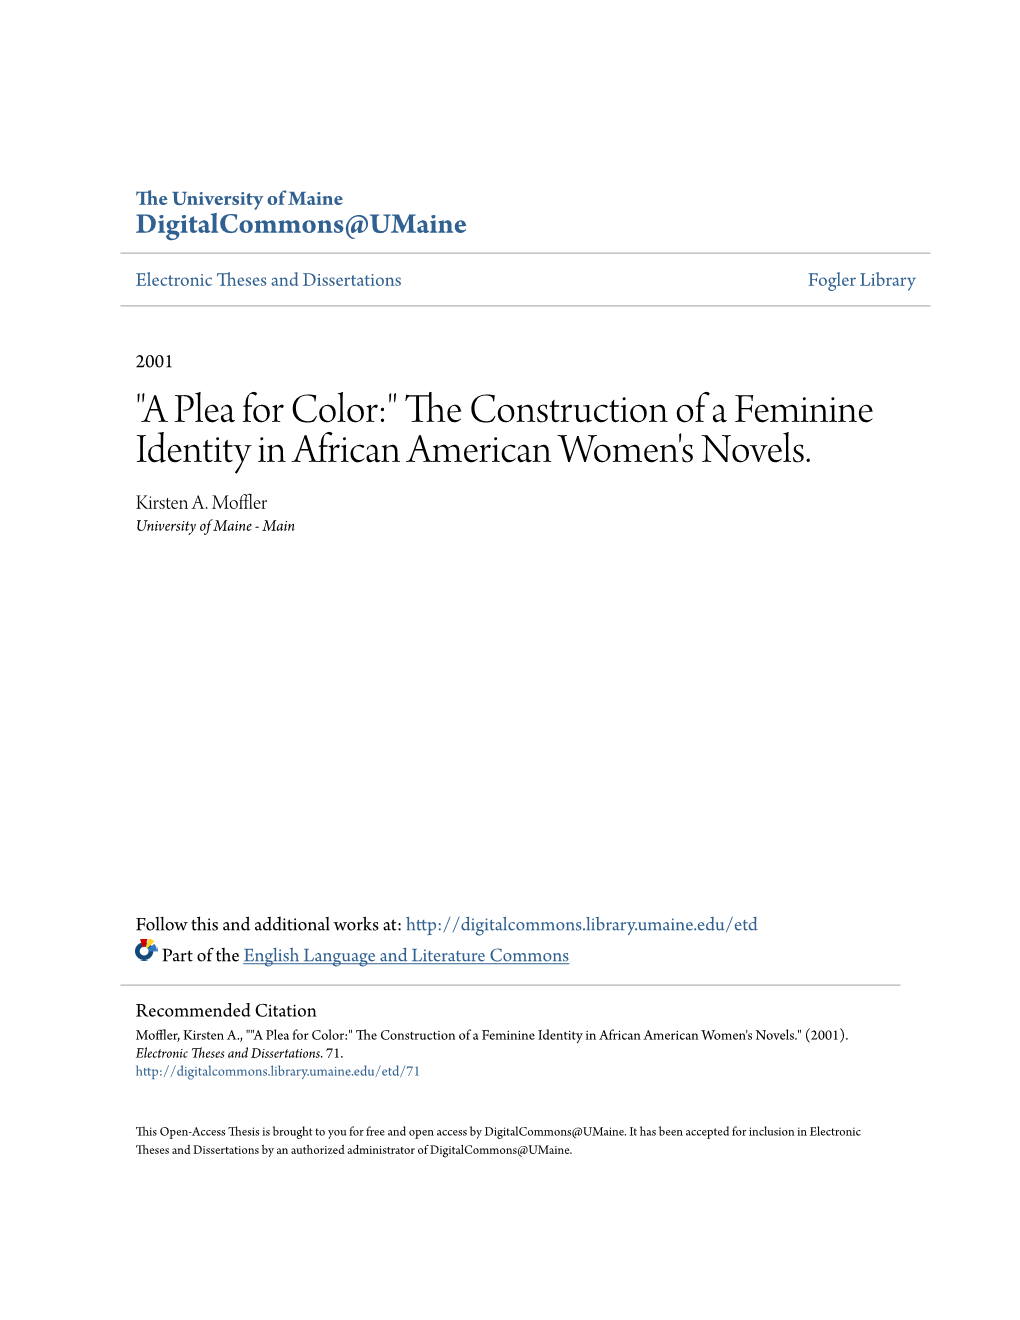 The Construction of a Feminine Identity in African American